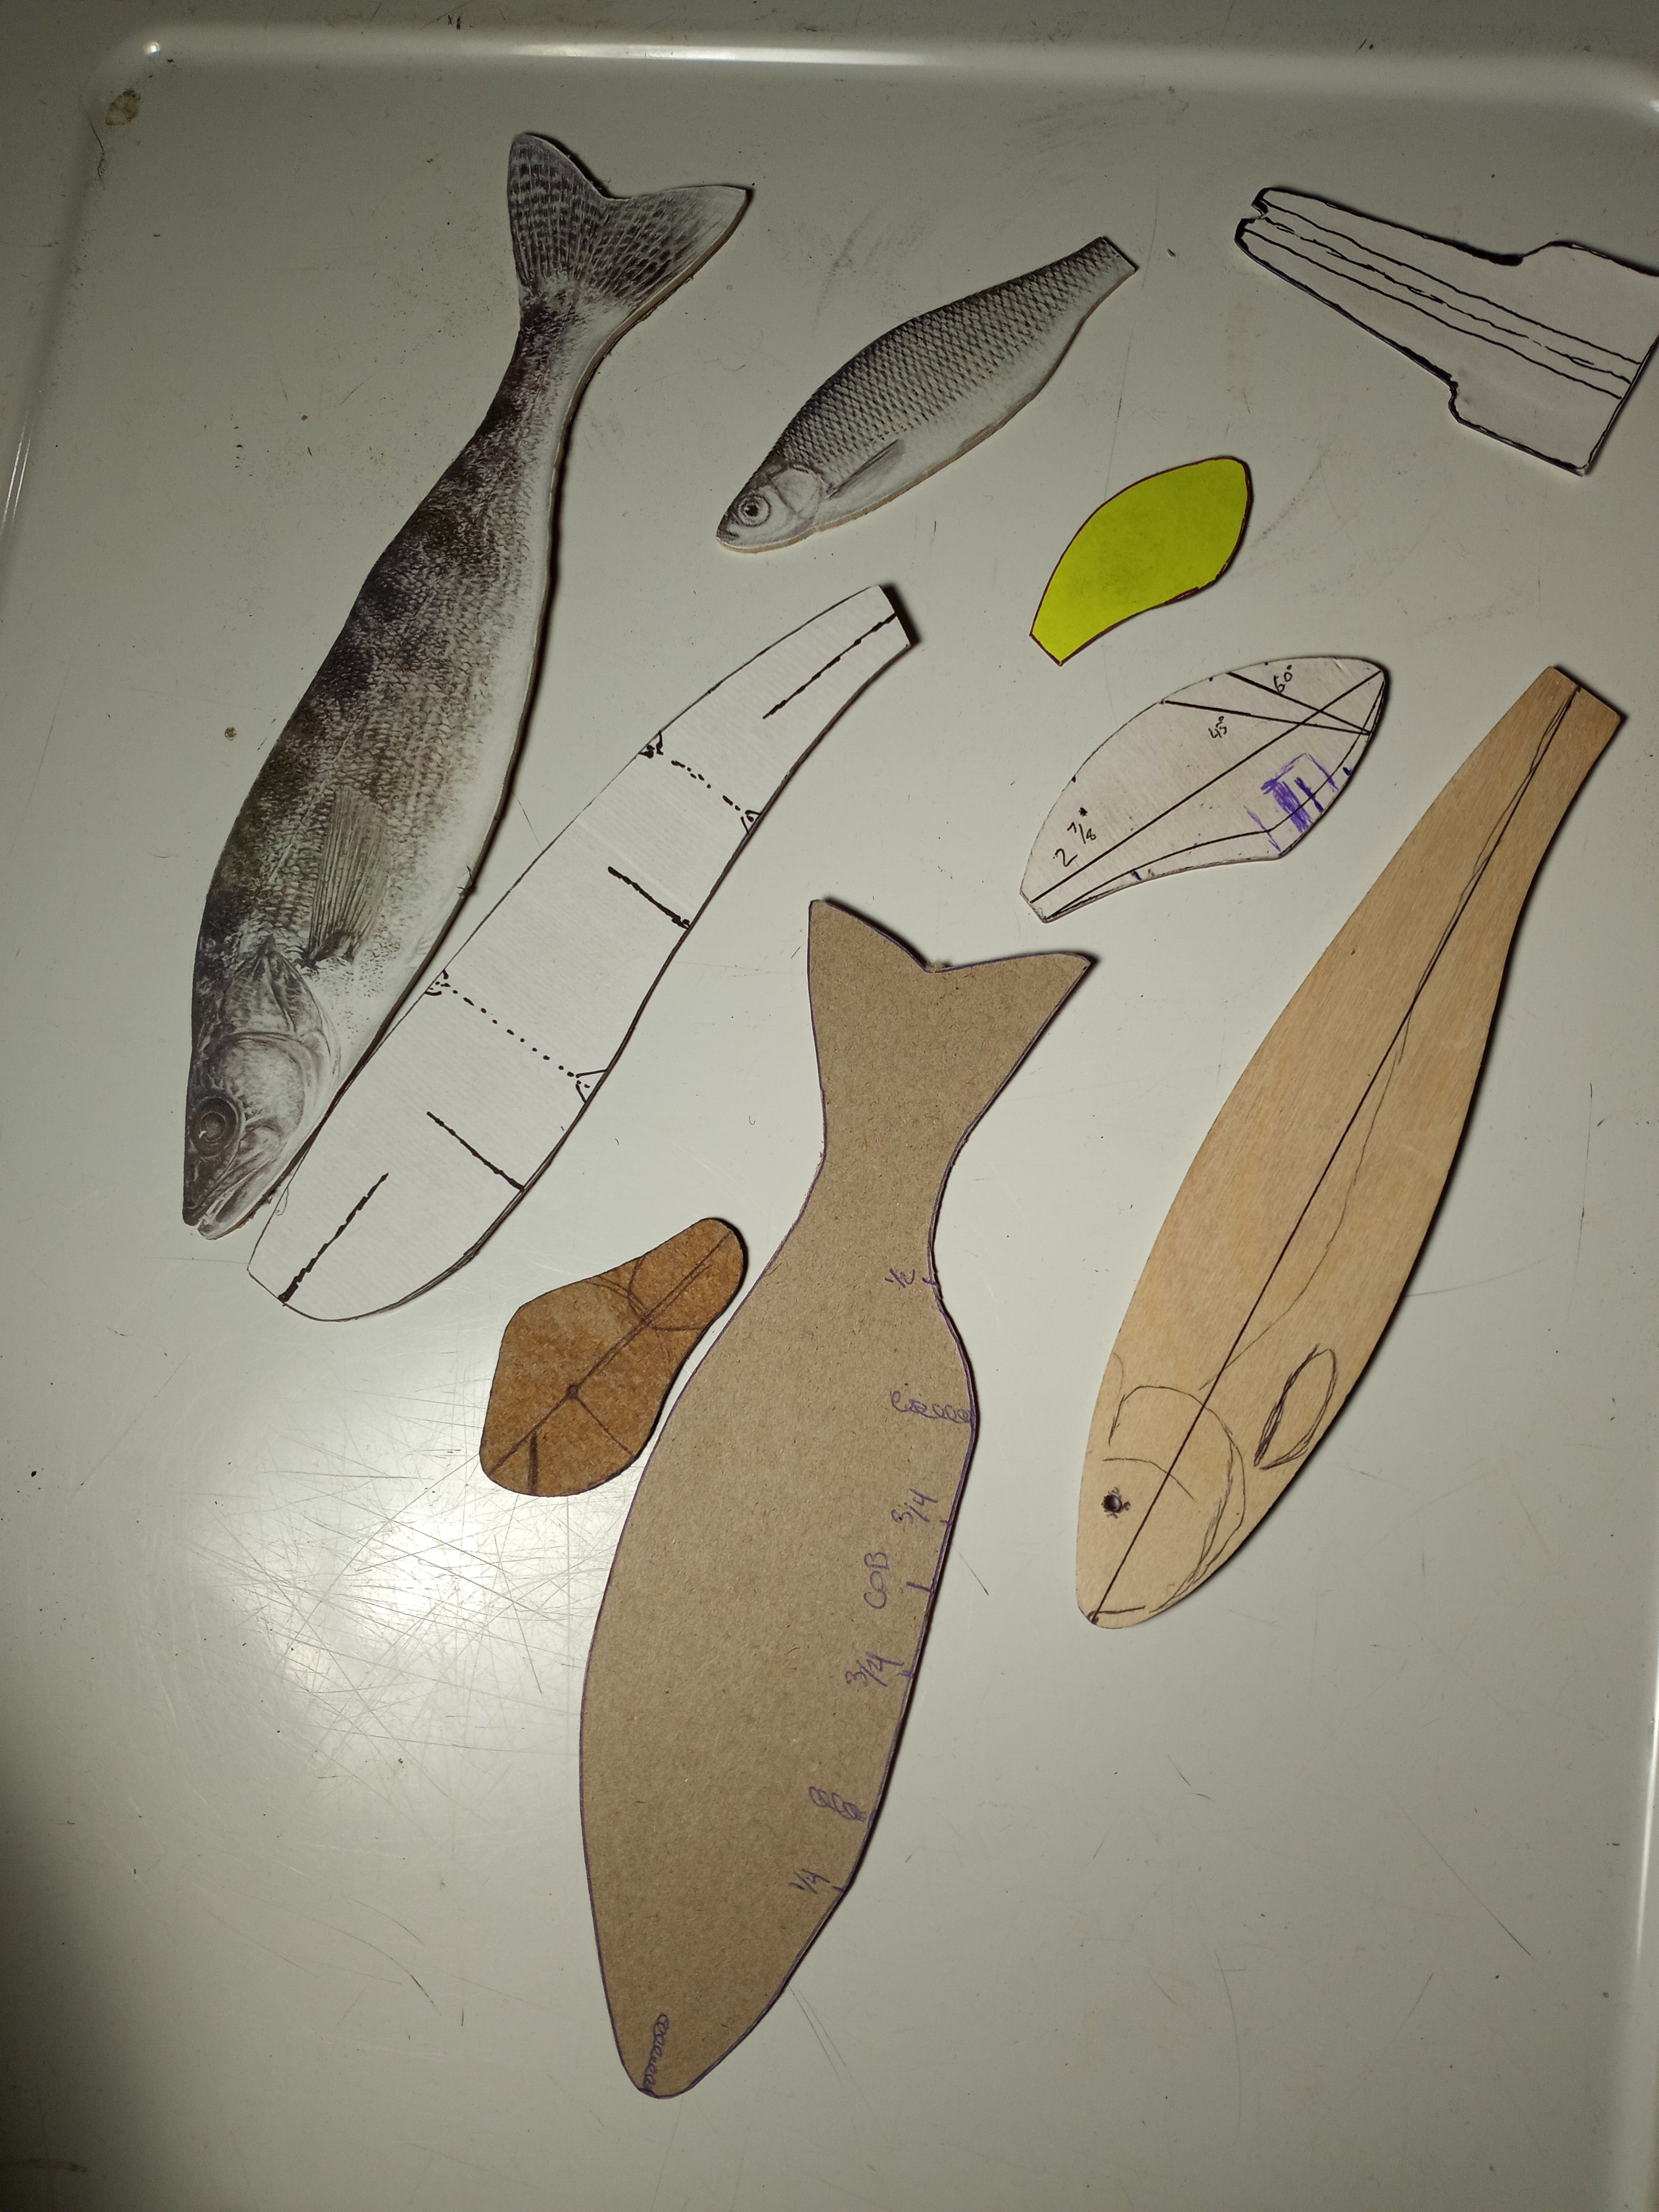 4 Fishing Lure Stencils Various Patterns -  Canada